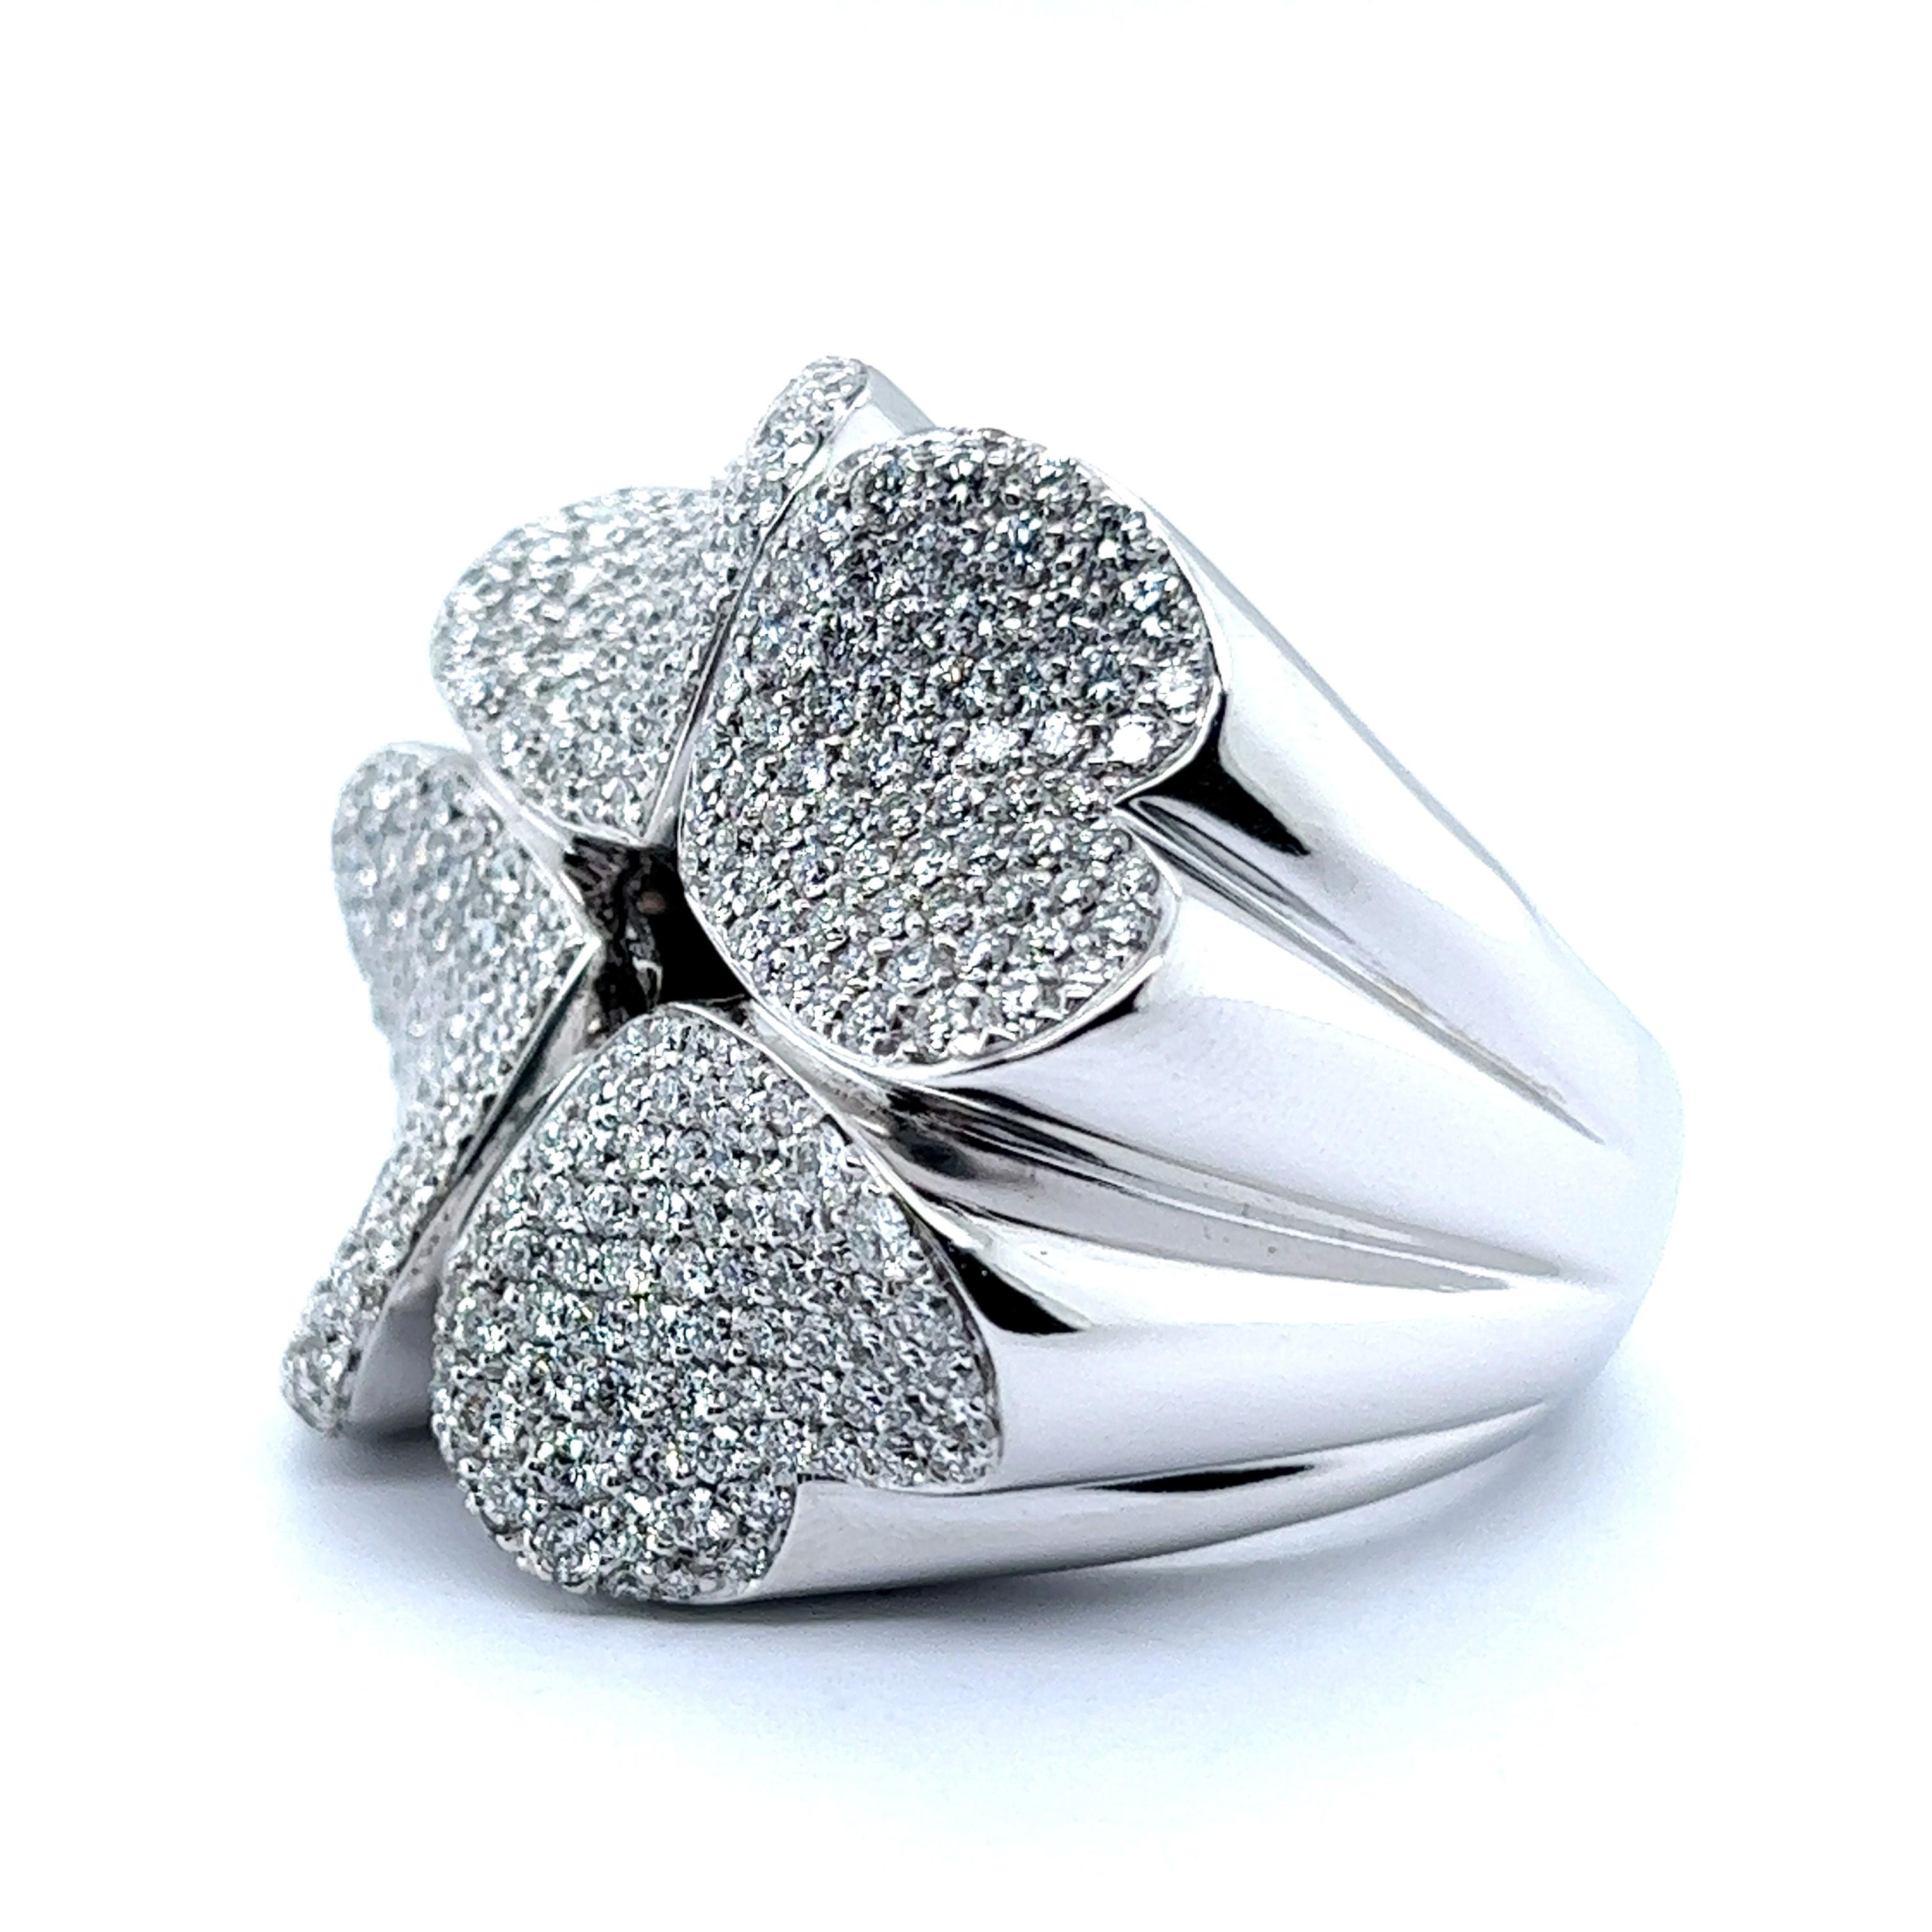 Clover Diamond Ring in 18 Karat White Gold by Pasquale Bruni 3